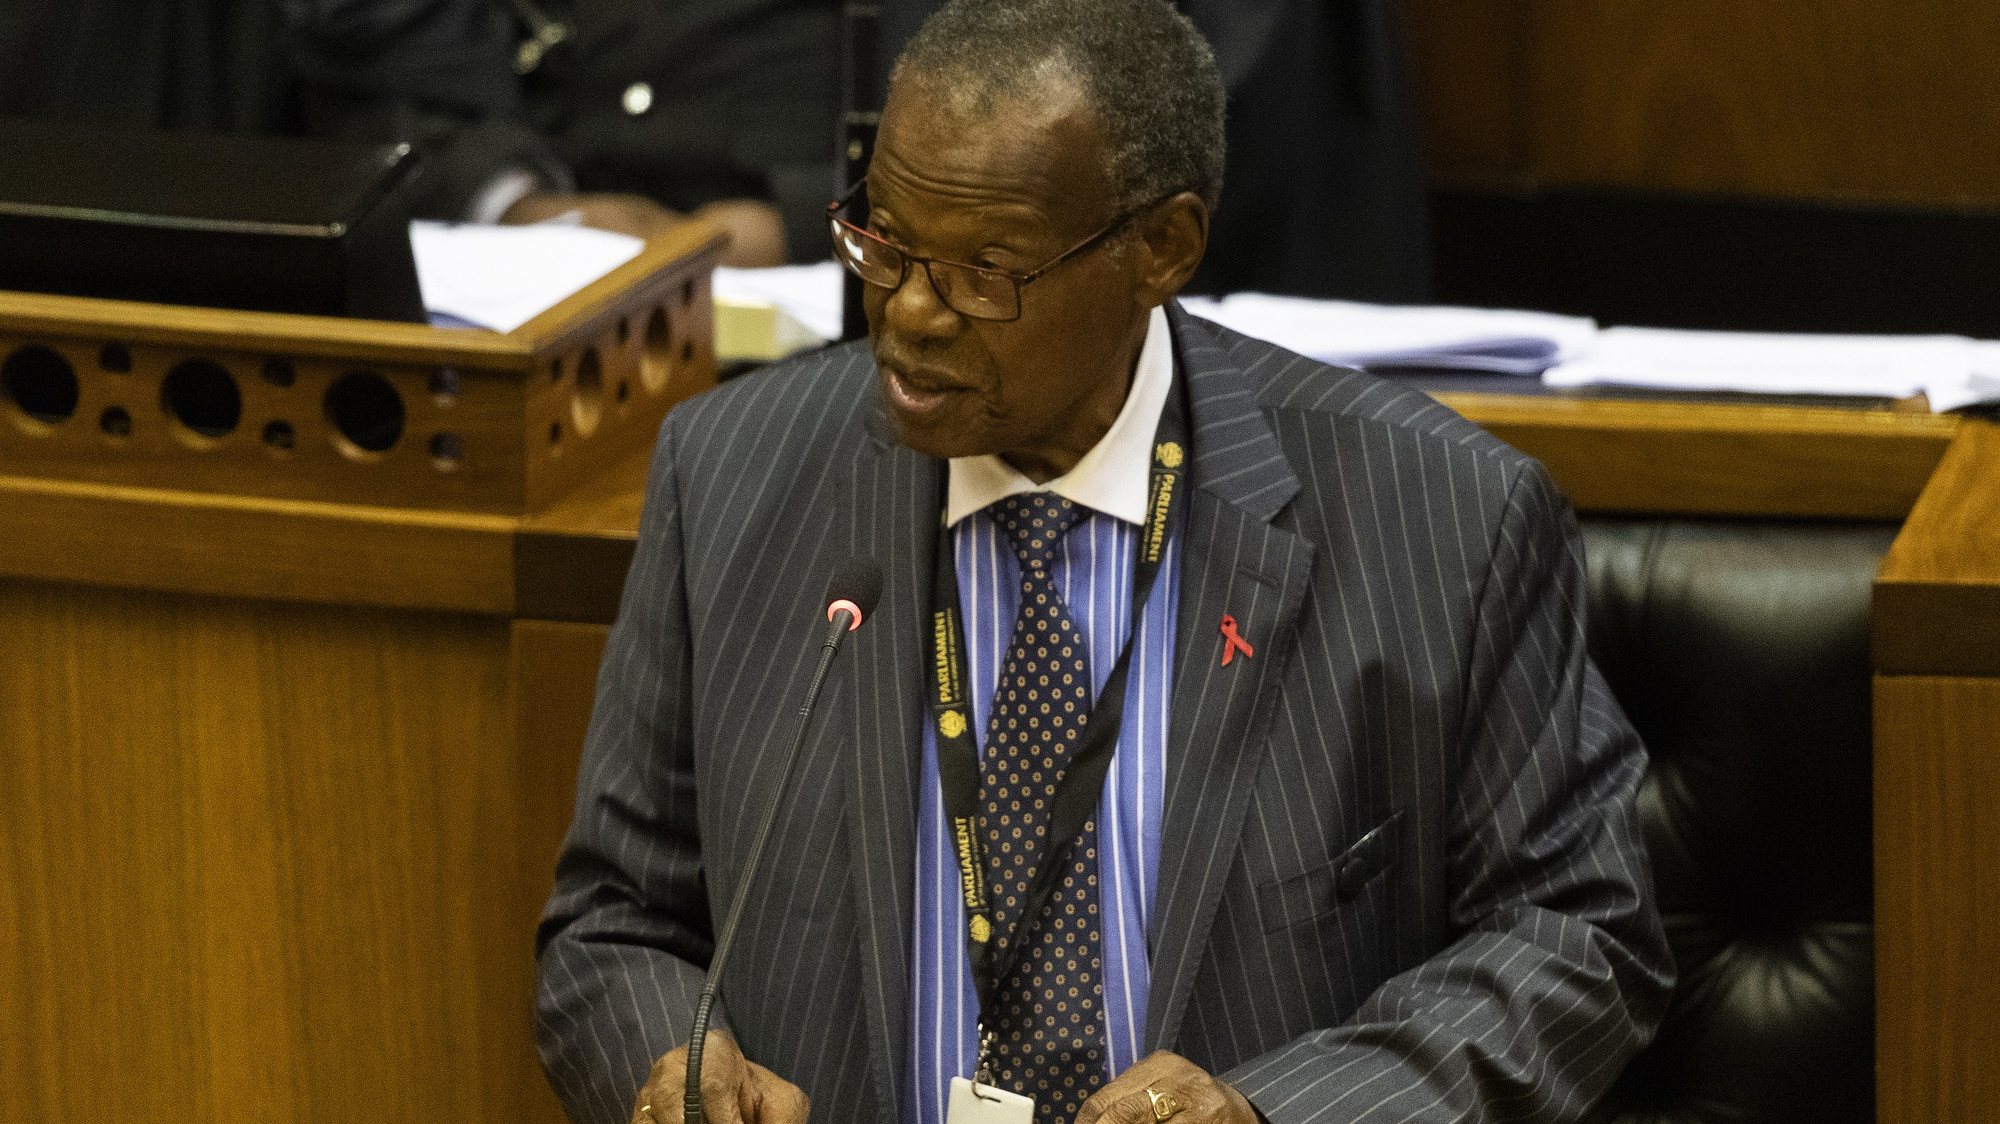 epa07592951 Leader of the Inkatha Freedom Party Mangosuthu Buthelezi speaks after Cyril Ramaphosa was elected president of South Africa during the swearing in of new members of the National Assembly and election of the National Assembly speaker and election of the president in Parliament, Cape Town, South Africa, 22 May 2019. This is the first sitting of parliament following the 2019 general elections making this the 6th parliament since the fall of apartheid.  EPA/NIC BOTHMA